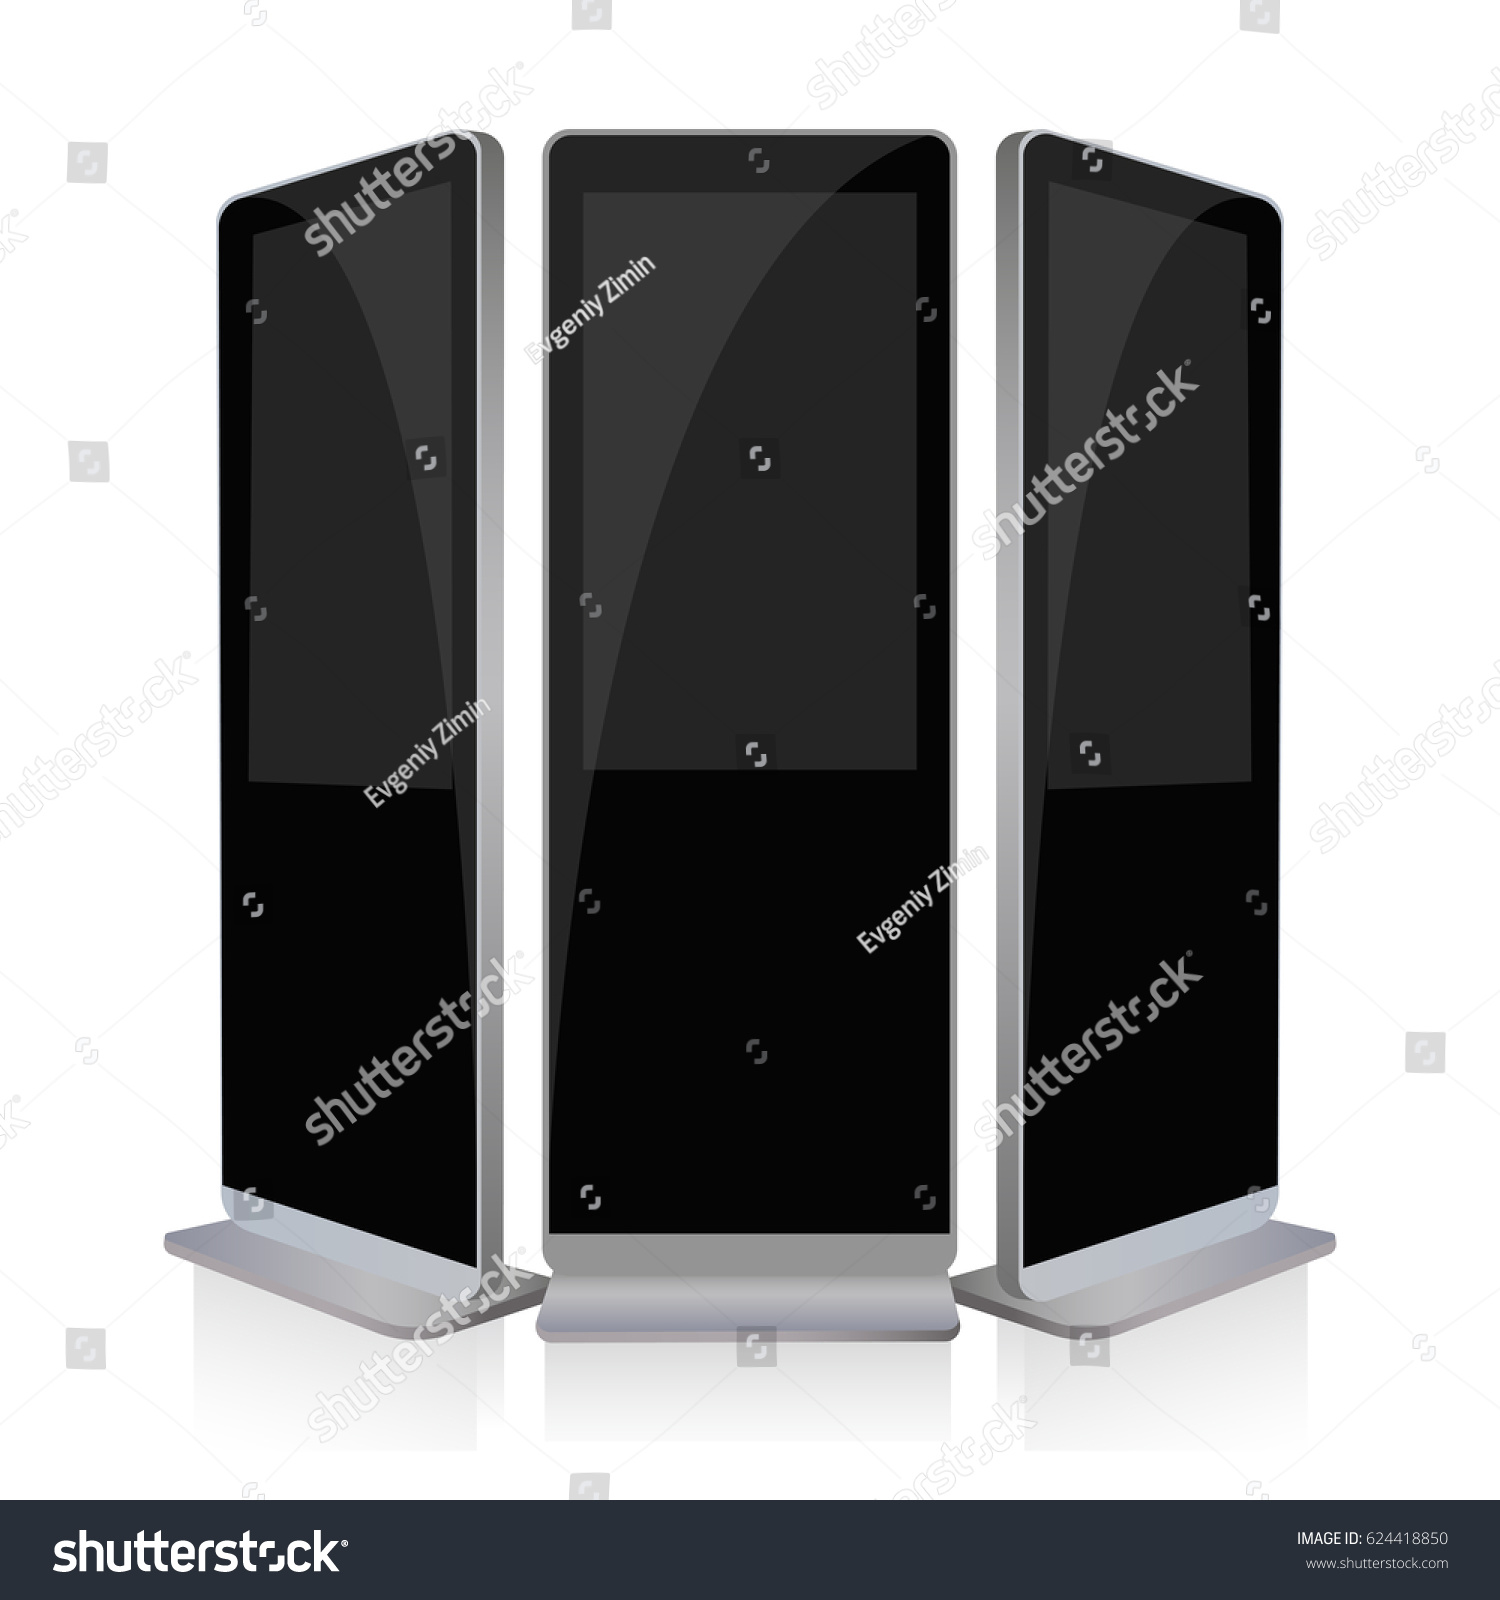 Download Advertising Screen Mockup Isolated LCD High Stock Vector (Royalty Free) 624418850 - Shutterstock